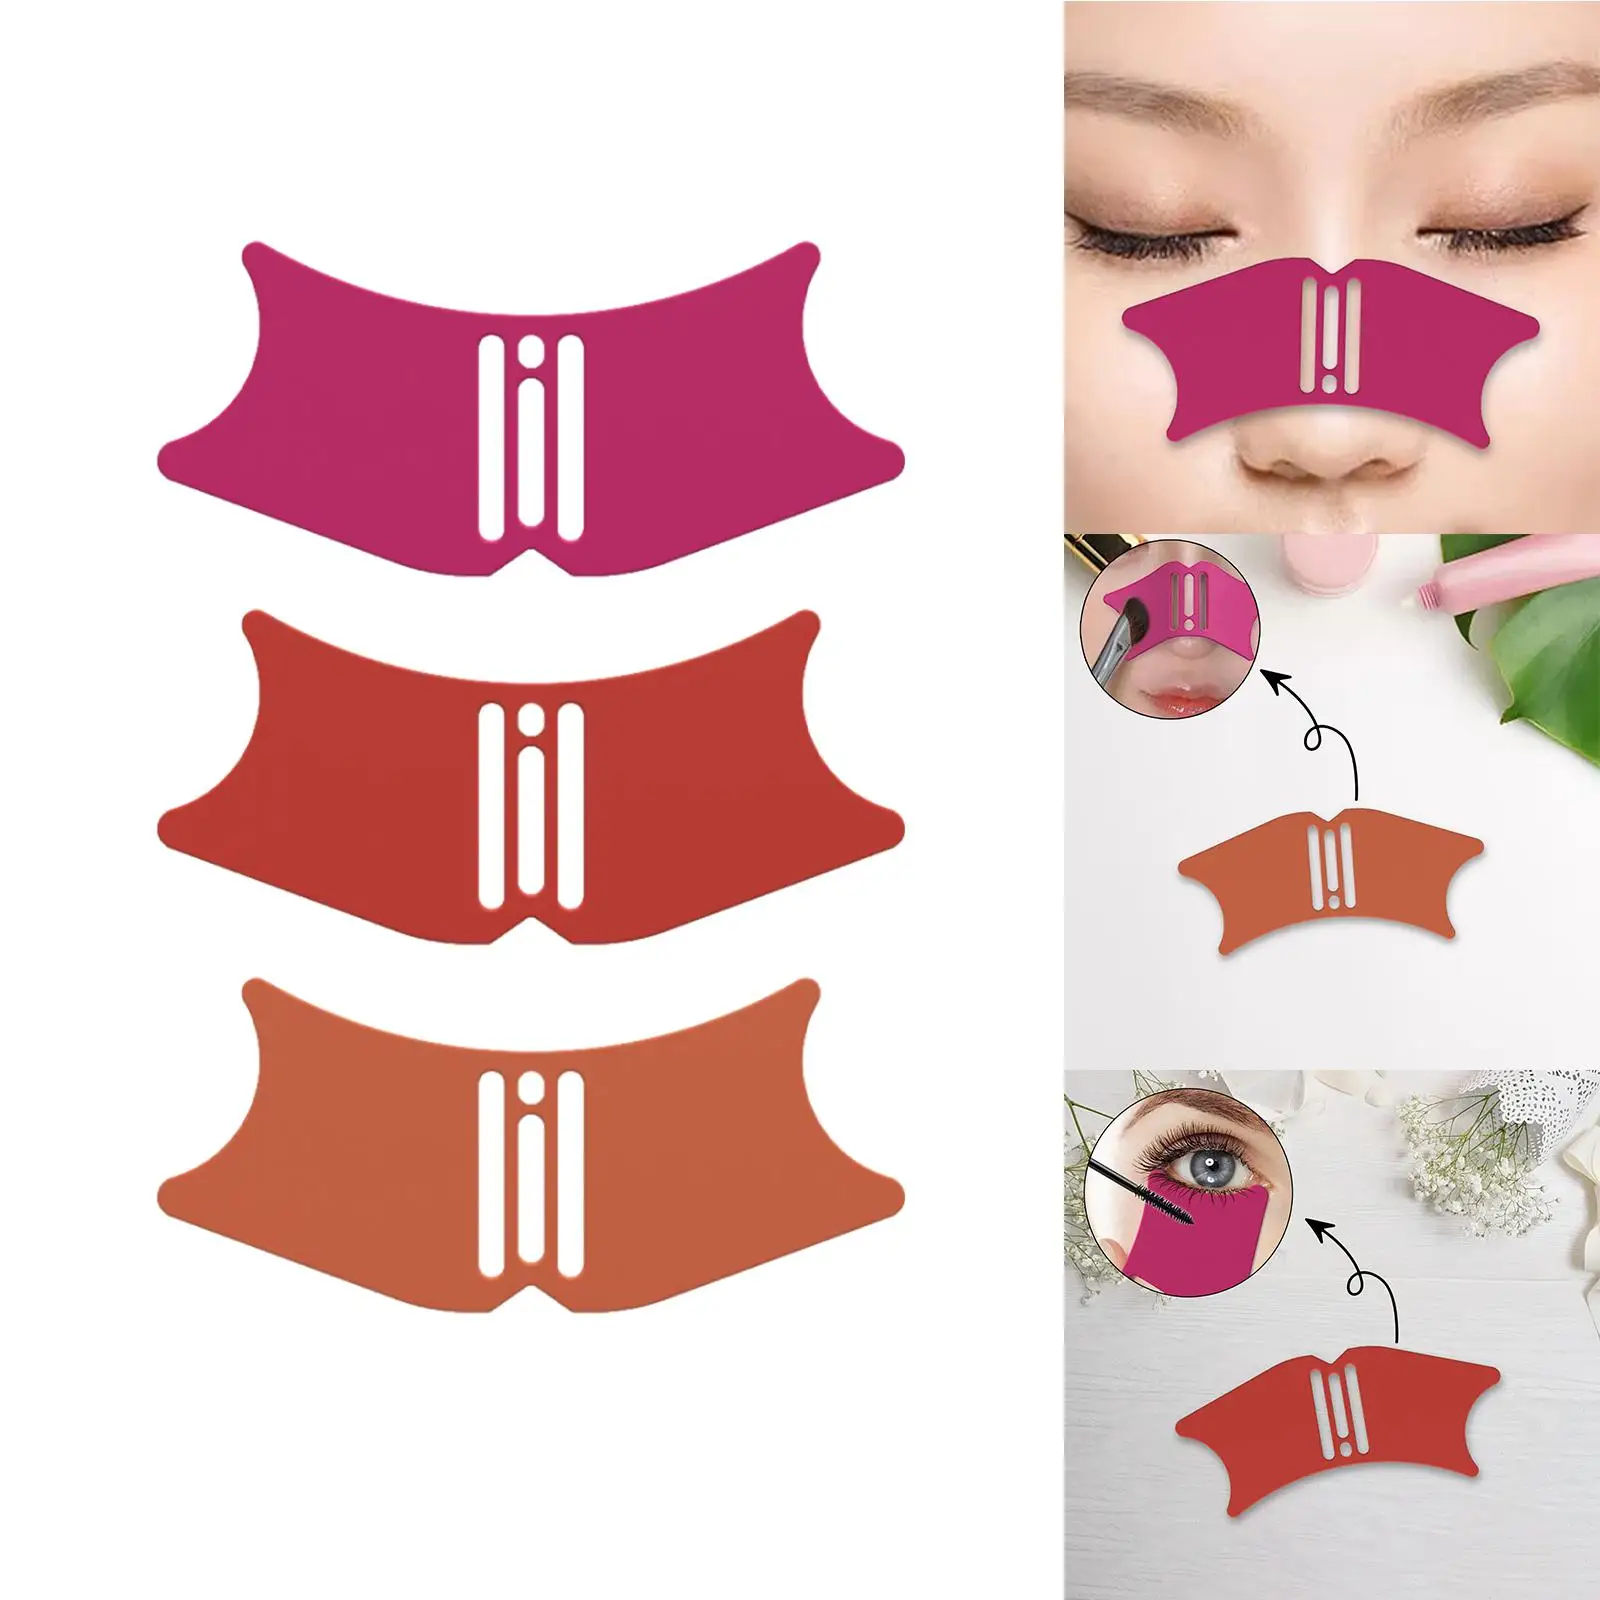 Silicone Eyeliner Stencil Nose Contour Stencil Waterproof for Various Face Shapes Sturdy Comfortable to Hold Makeup Tool